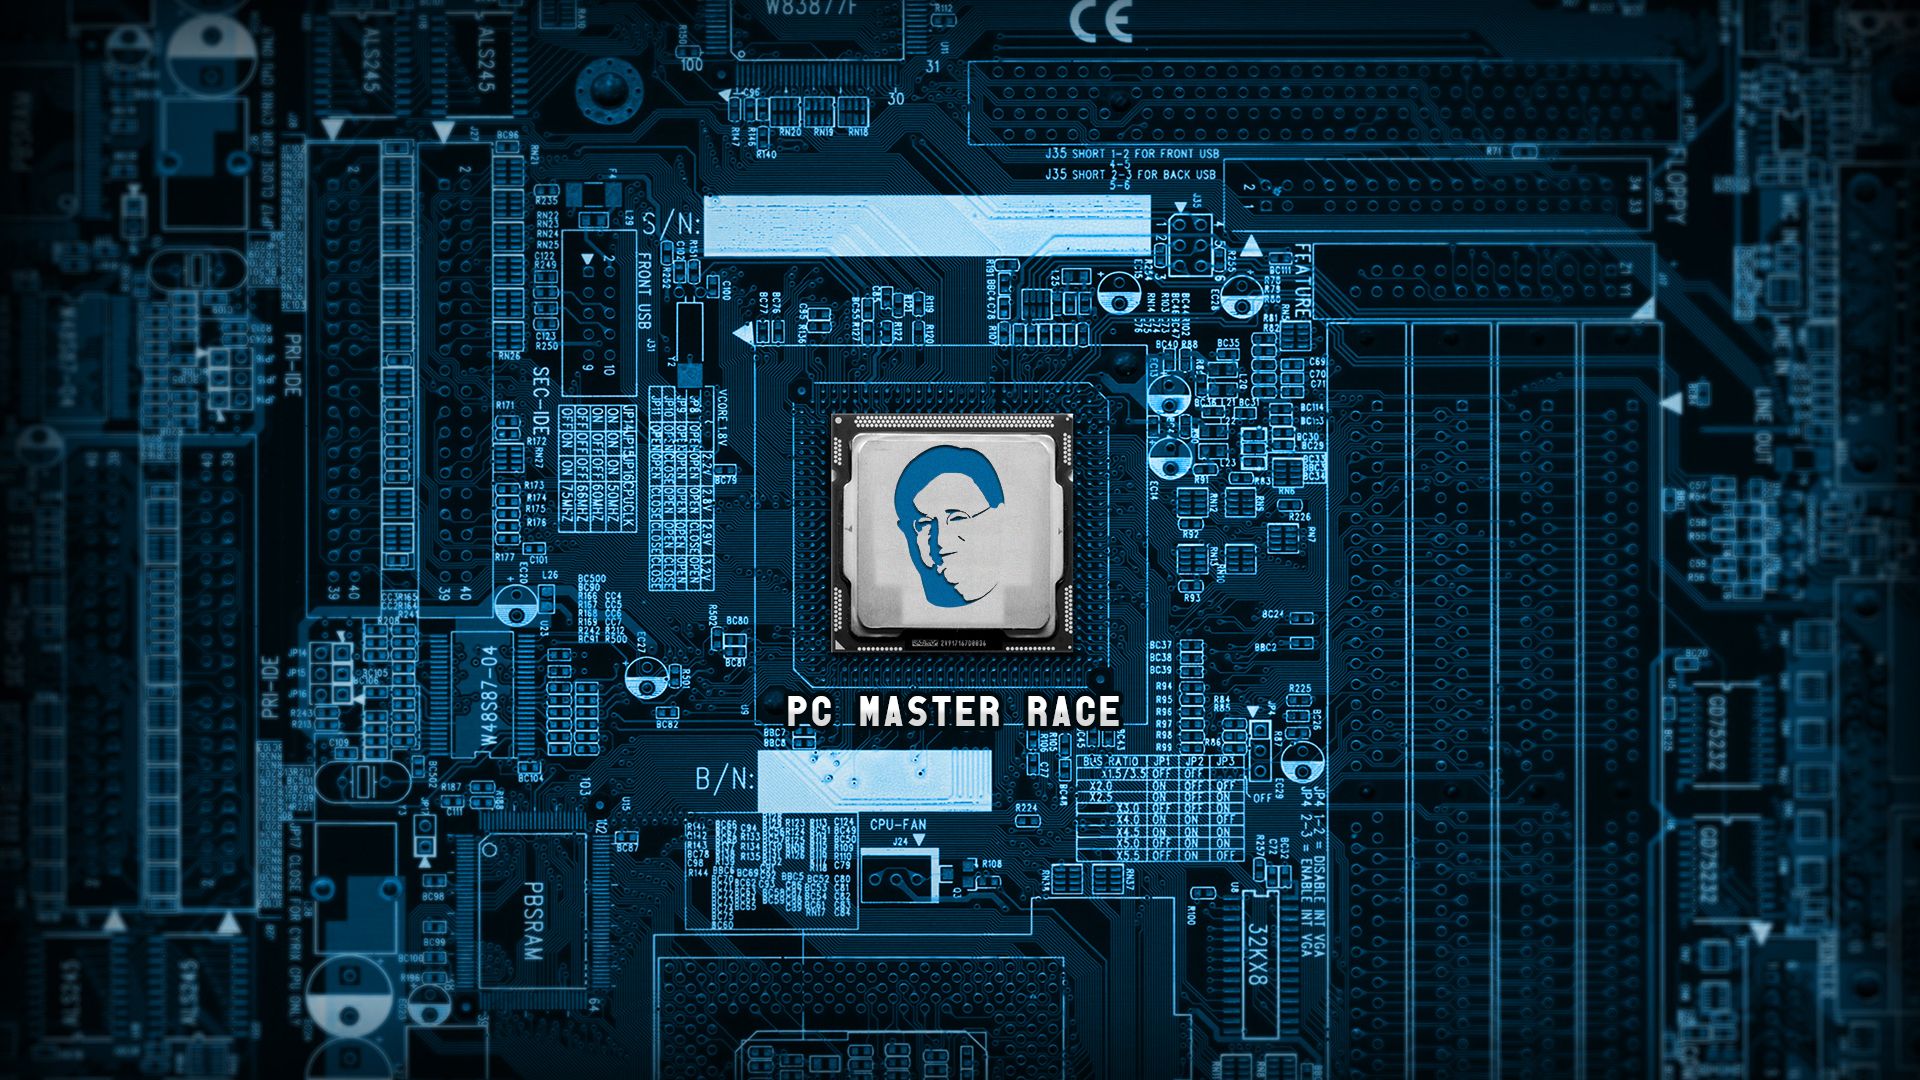 I made a wallpaper for the master race. What do you think